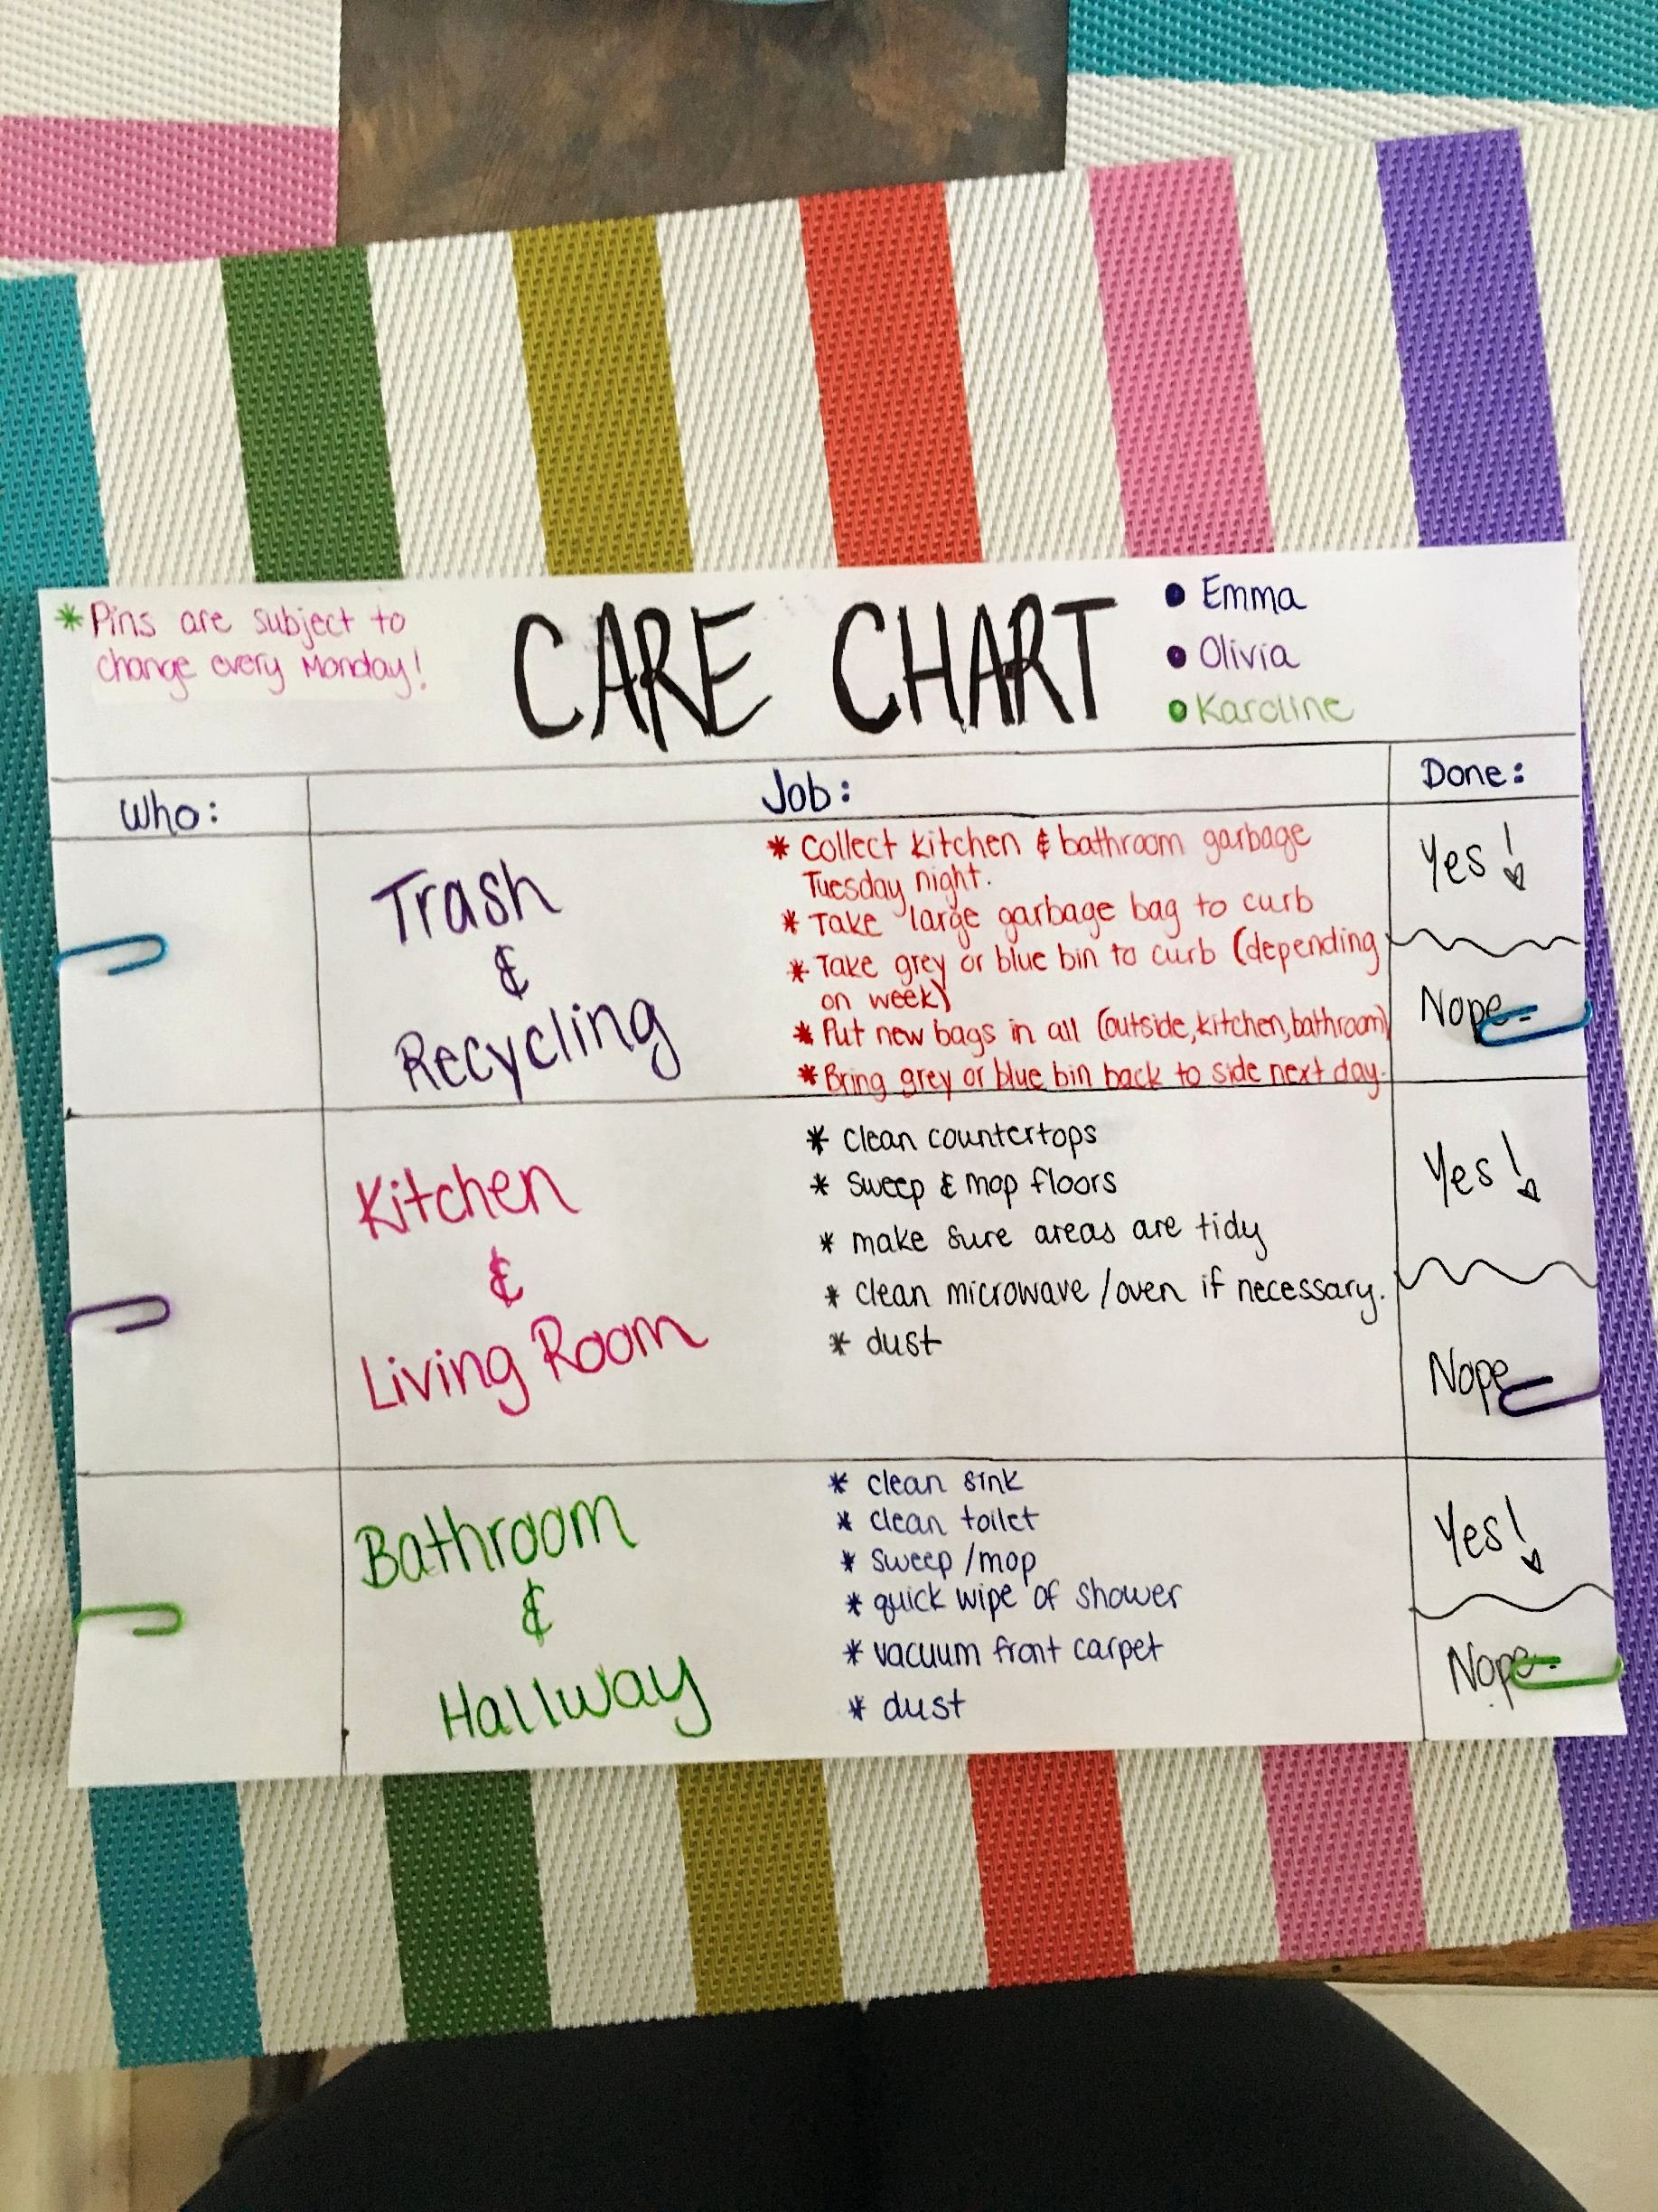 Chore Chart for Roommates Lovely College Roommates Care Chore Weekly Chart …